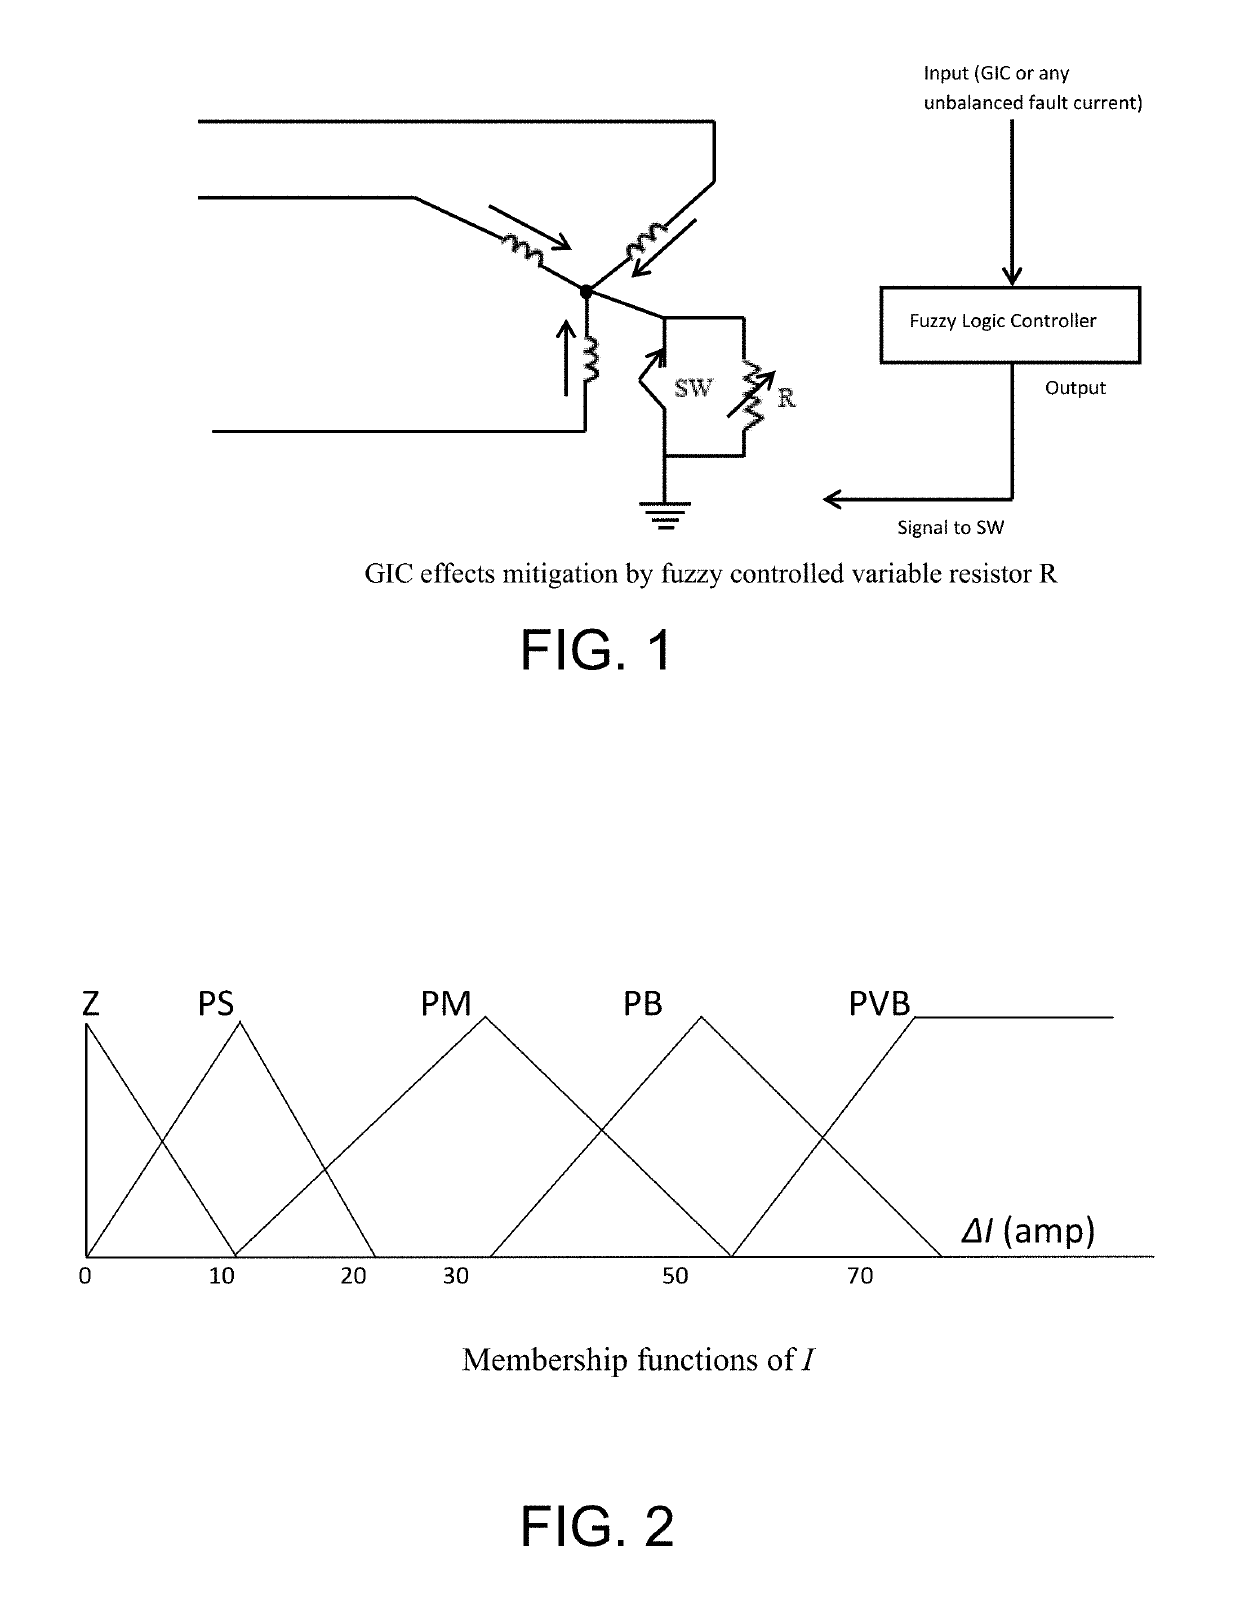 Apparatus for mitigation of adverse effects of geomagnetically induced currents on transformers